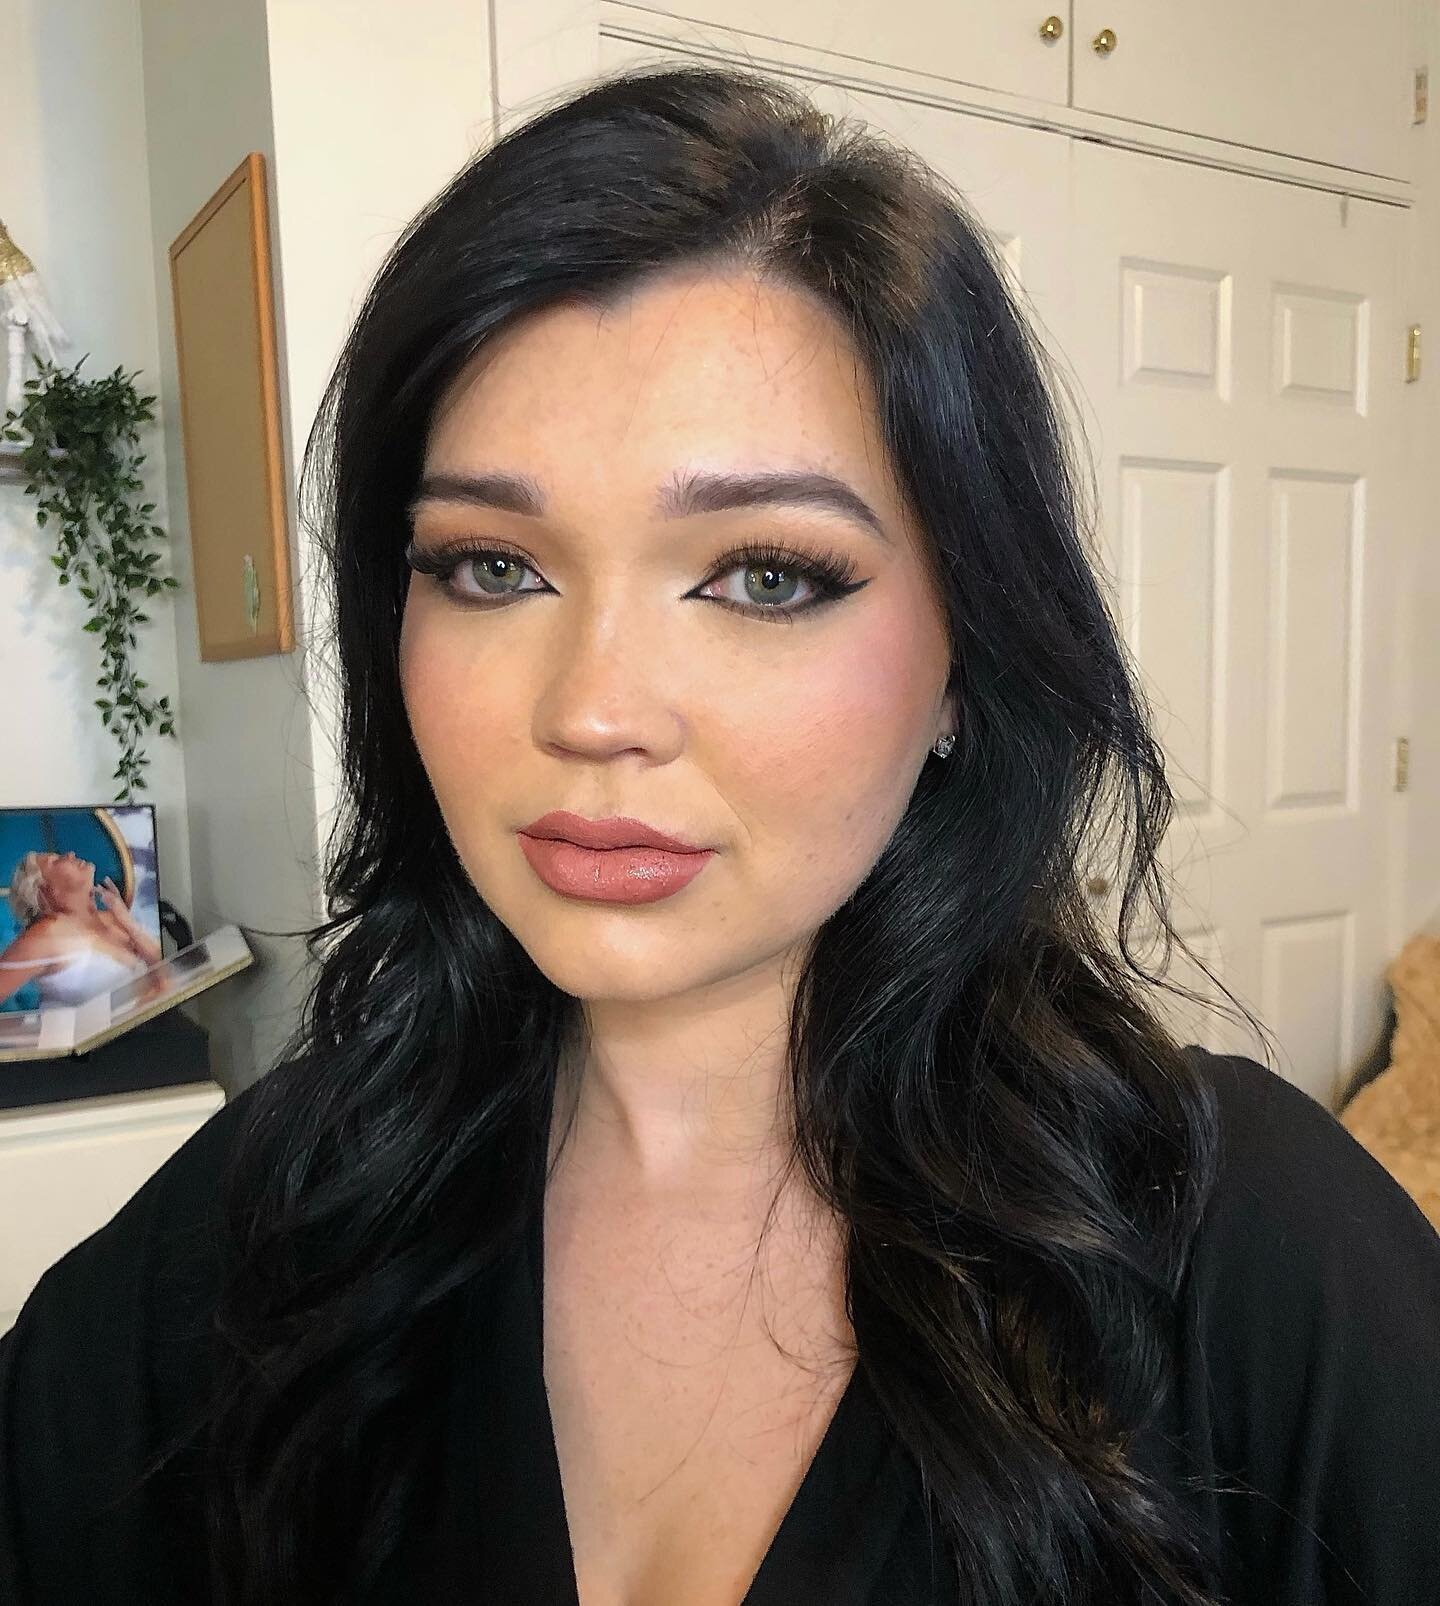 ✨siren eyes✨ 
Swipe to see a softer version of the look! 

Hair by @faith_verdebeauty 

Products used: 
@bobbibrown moisturizer 
@milkmakeup hydrogrip primer 
@sennacosmetics brow book
@temptu foundation
@rarebeauty concealer 
@benefitcosmetics bronz